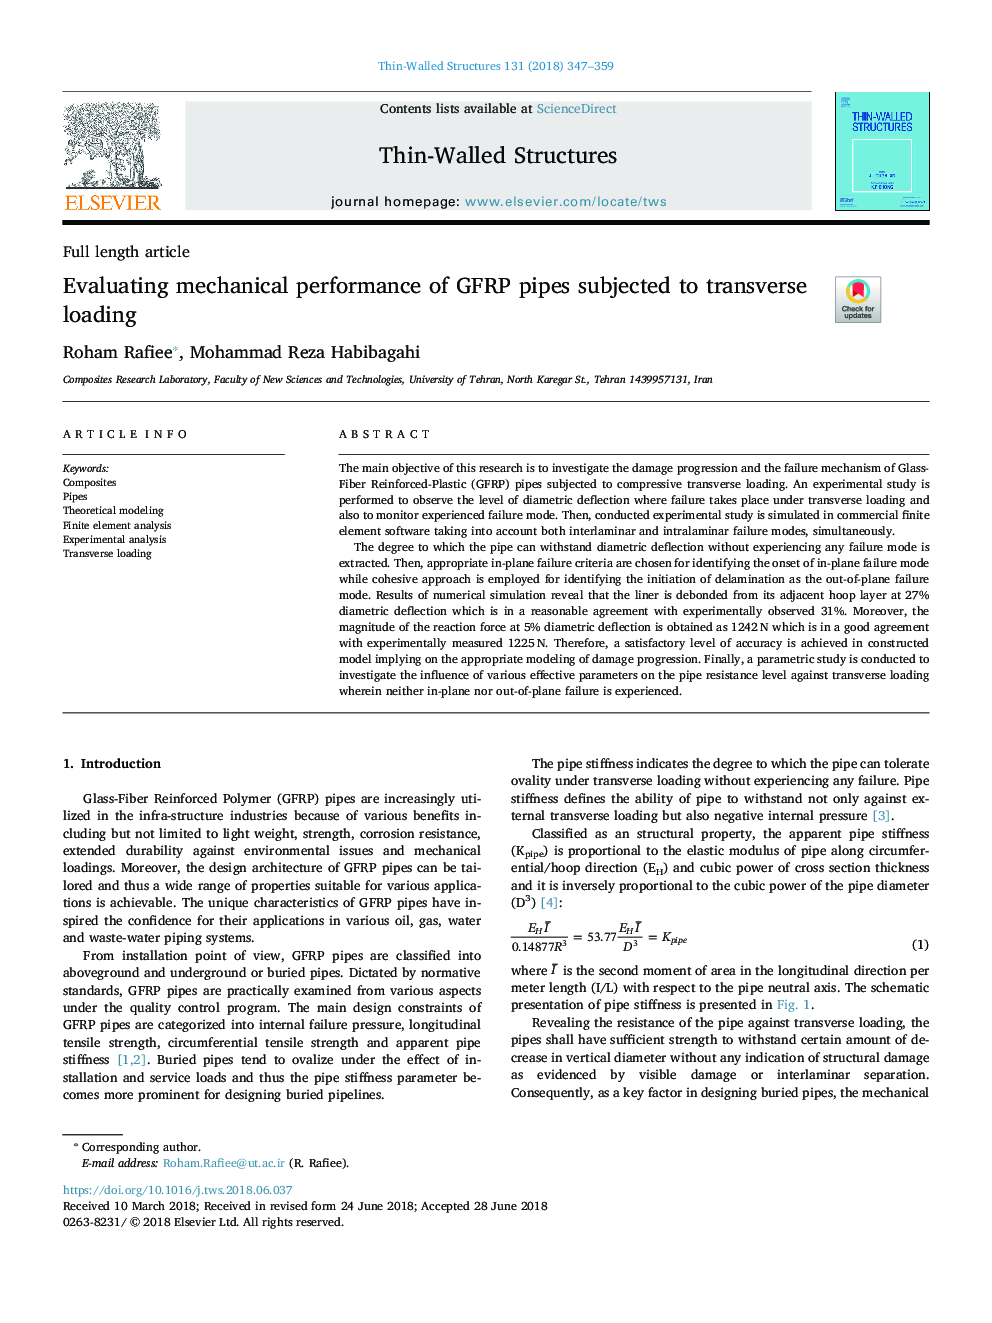 Evaluating mechanical performance of GFRP pipes subjected to transverse loading